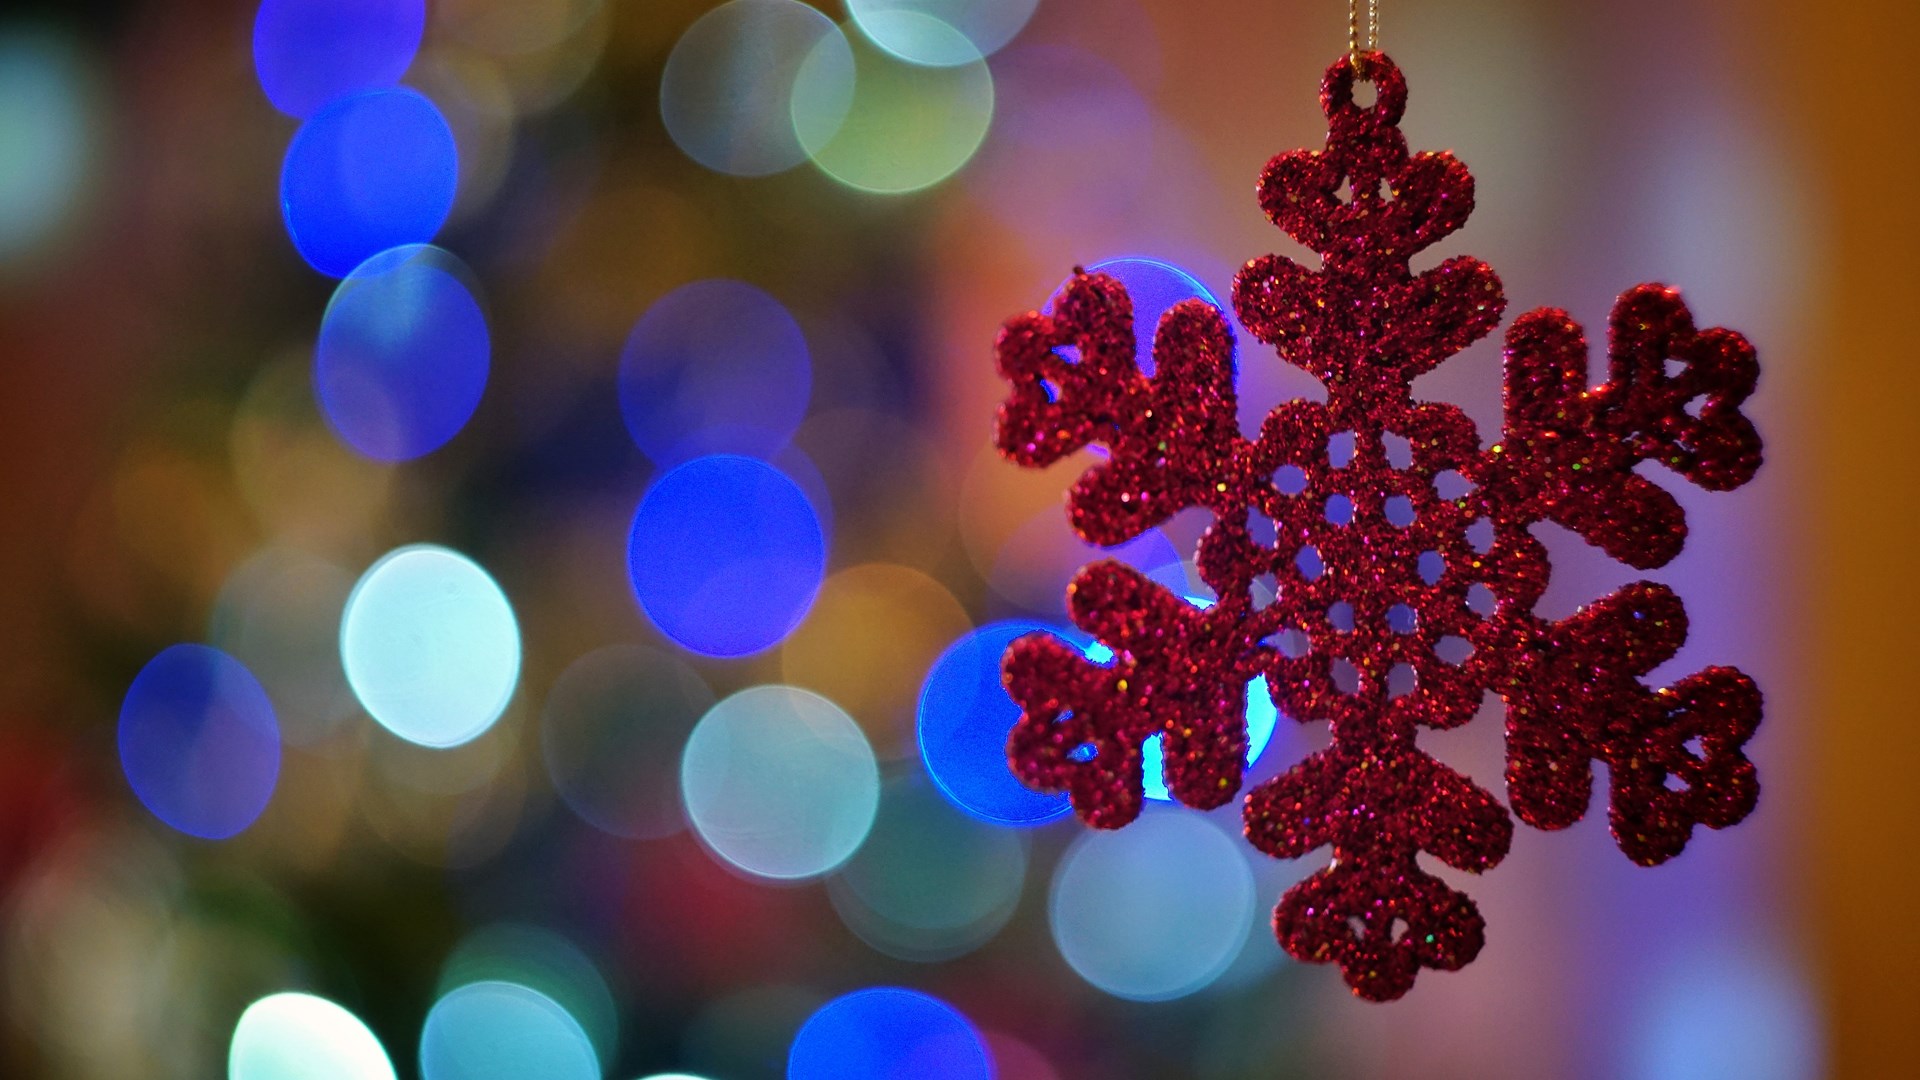 Microsoft Release Winter Holiday Glow Windows Wallpaper Pack